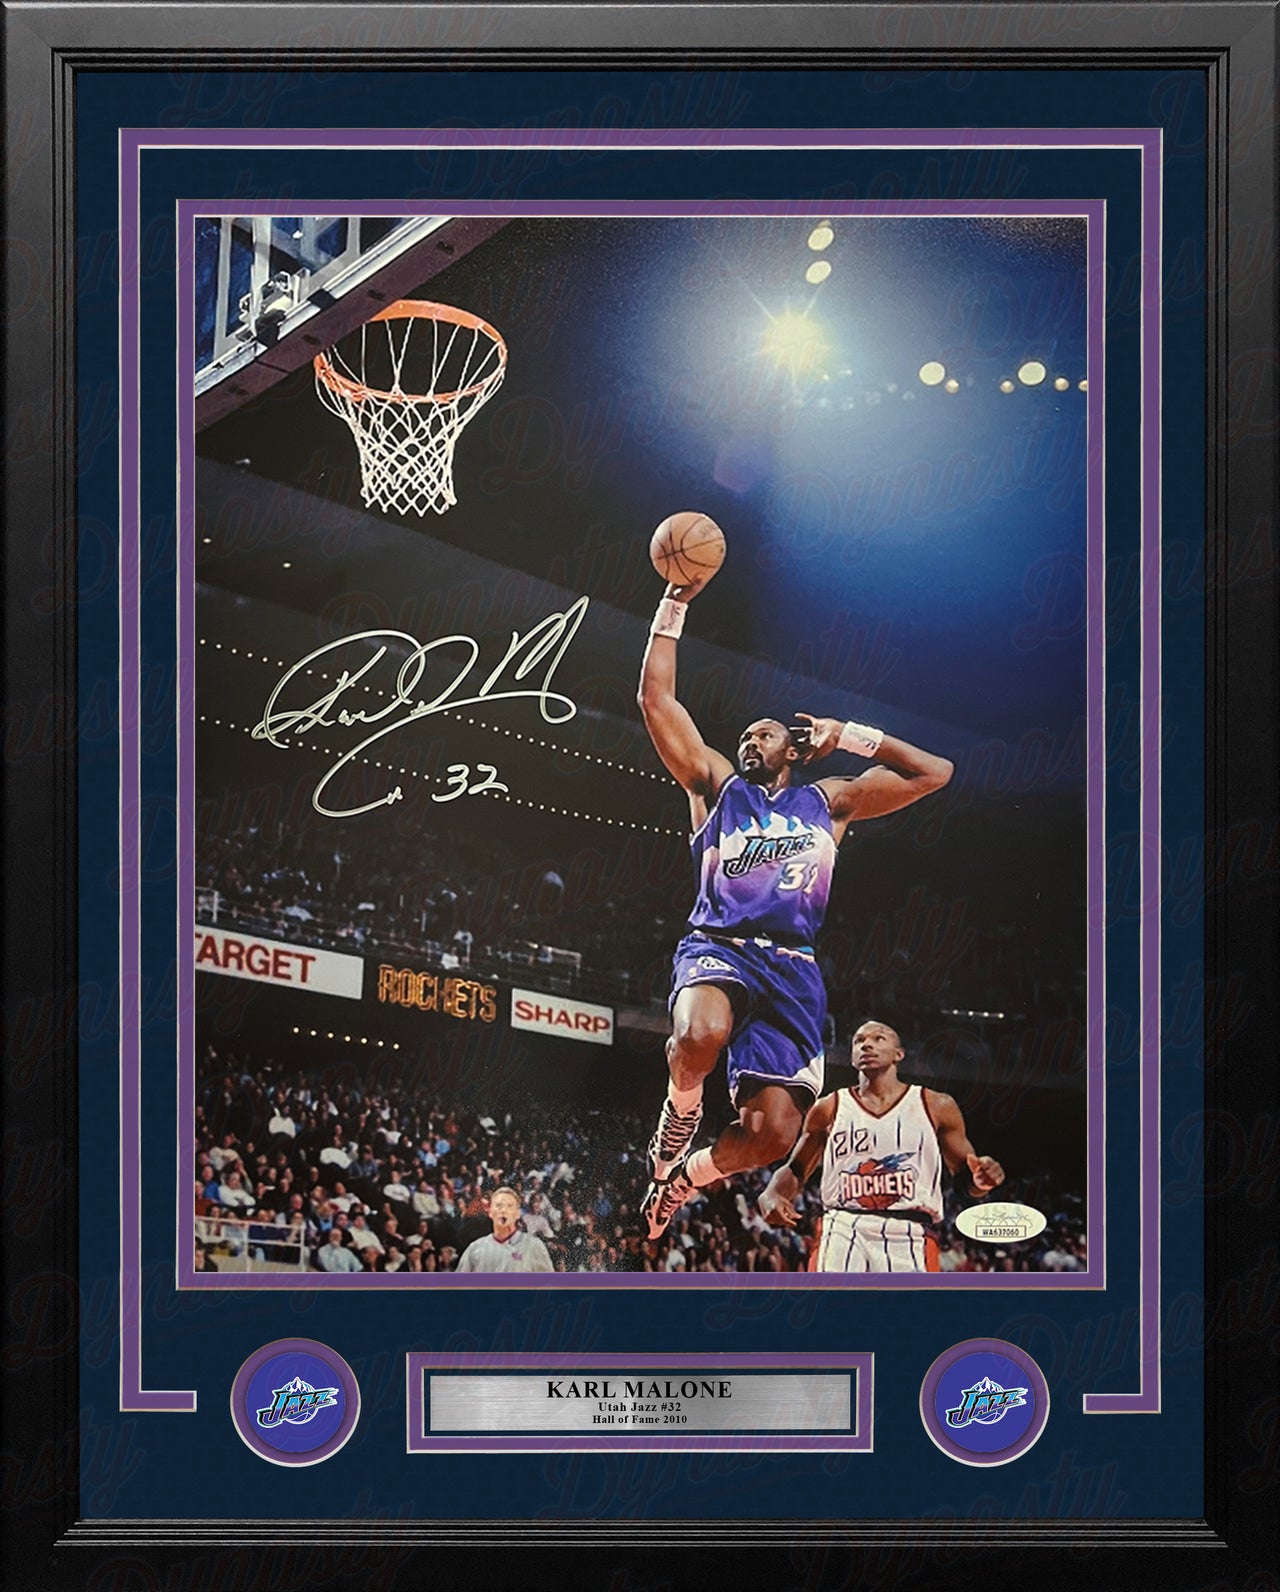 Karl Malone in Action Utah Jazz Autographed Framed Basketball Photo - Dynasty Sports & Framing 